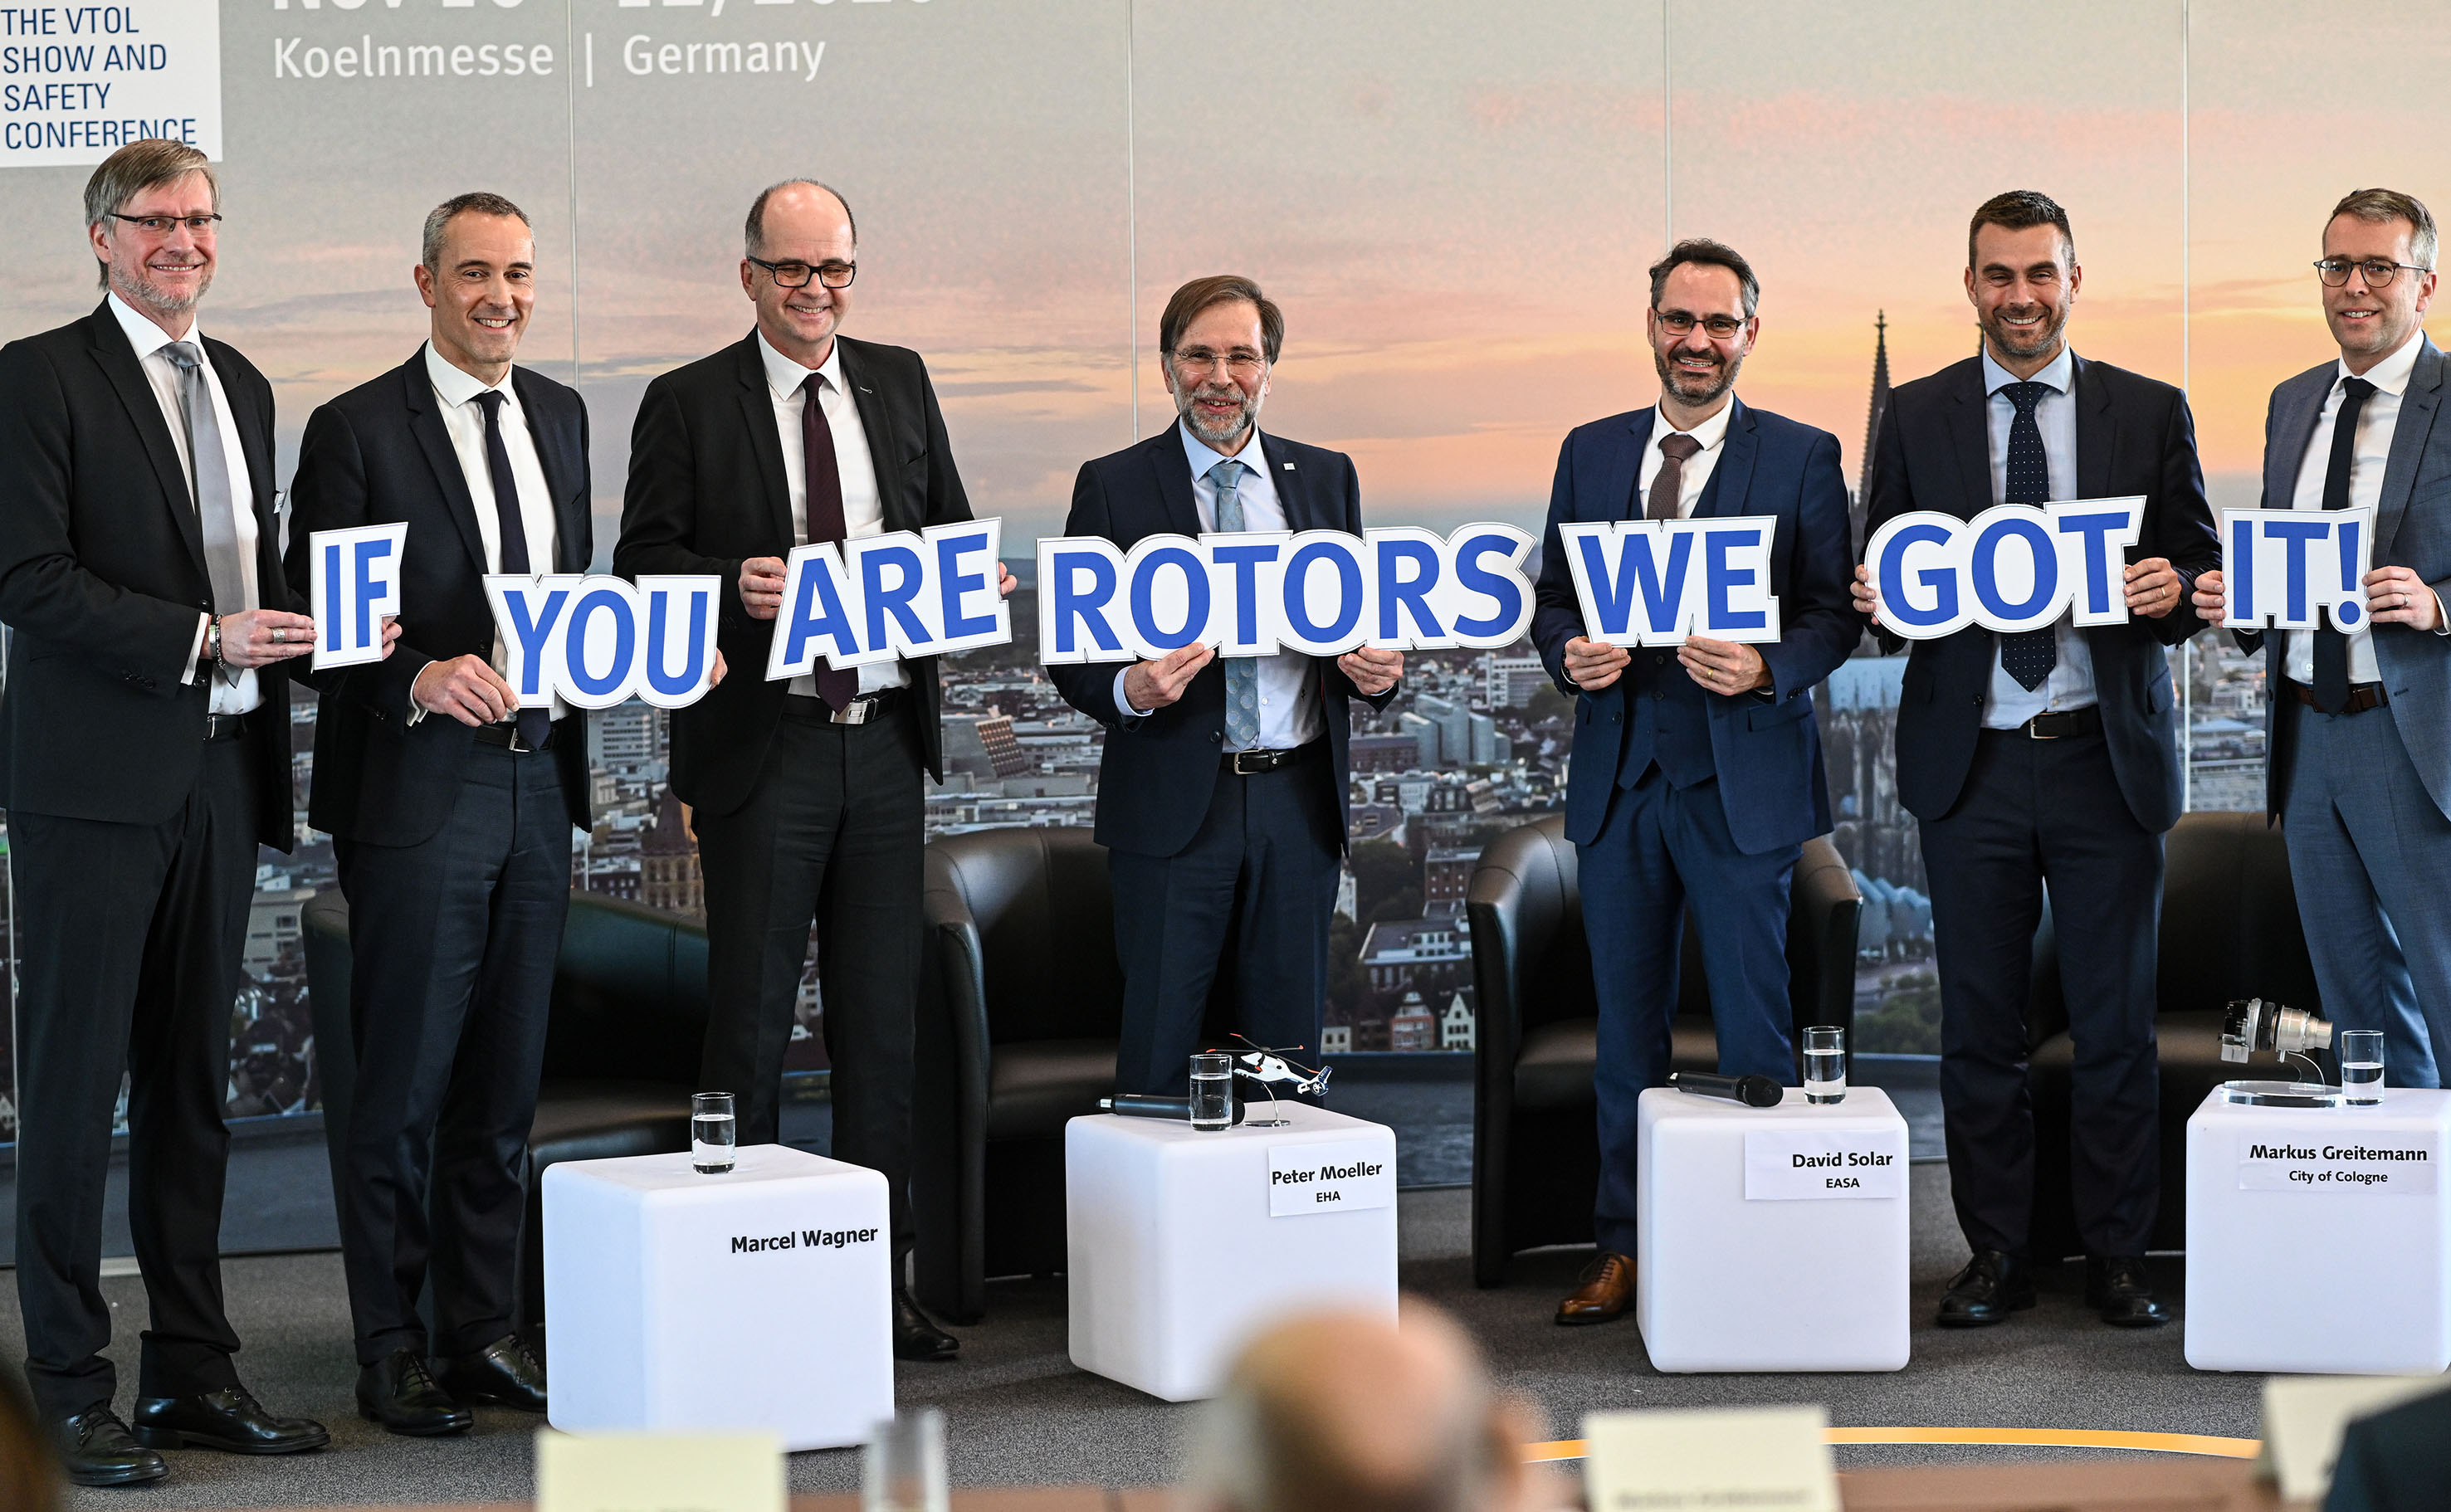 EUROPEAN ROTORS partners with Vertical Flight Society for conference